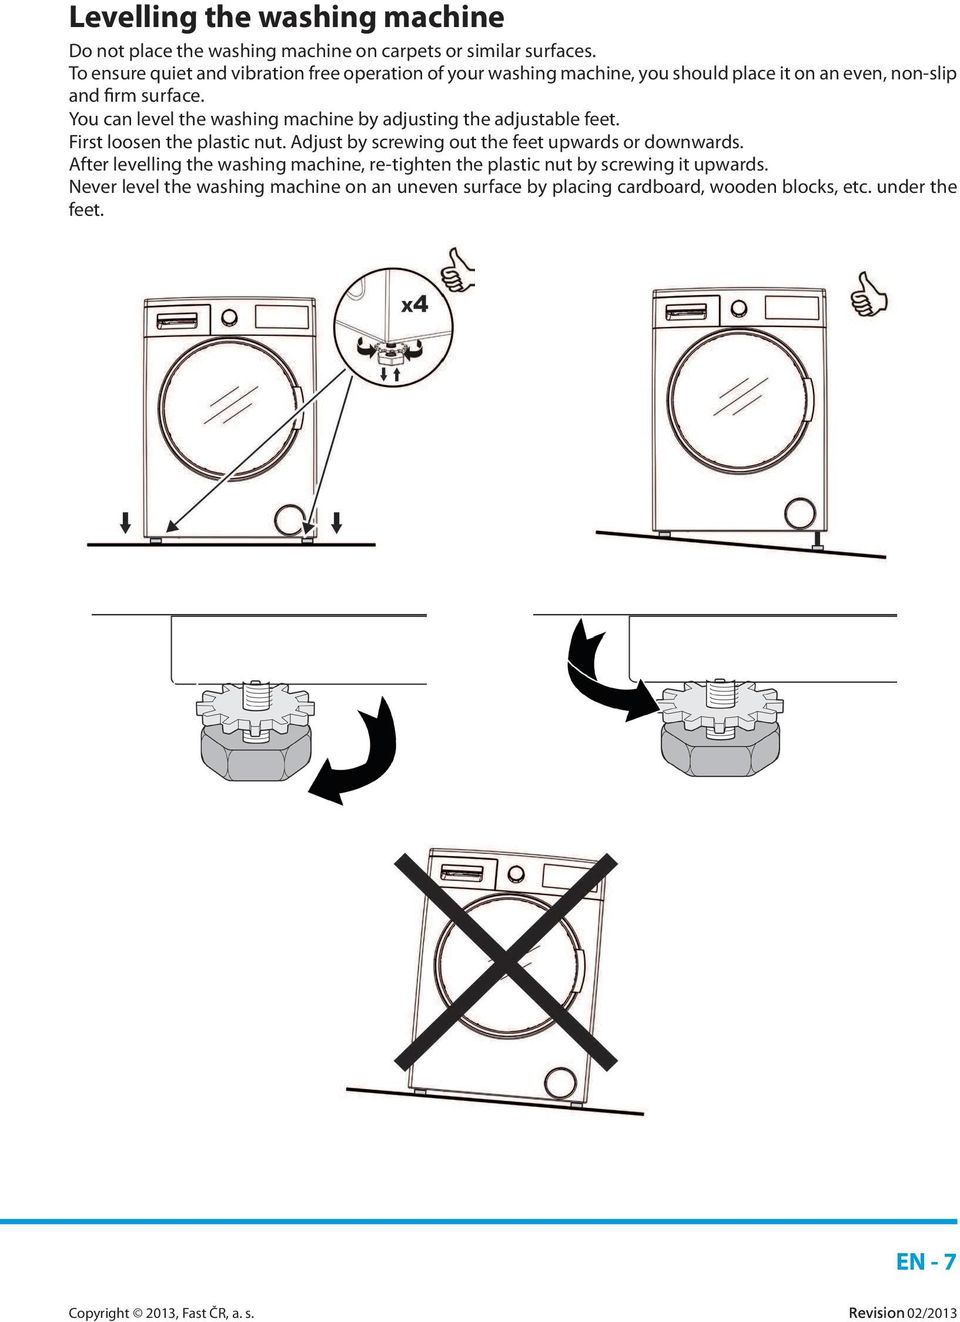 You can level the washing machine by adjusting the adjustable feet. First loosen the plastic nut.